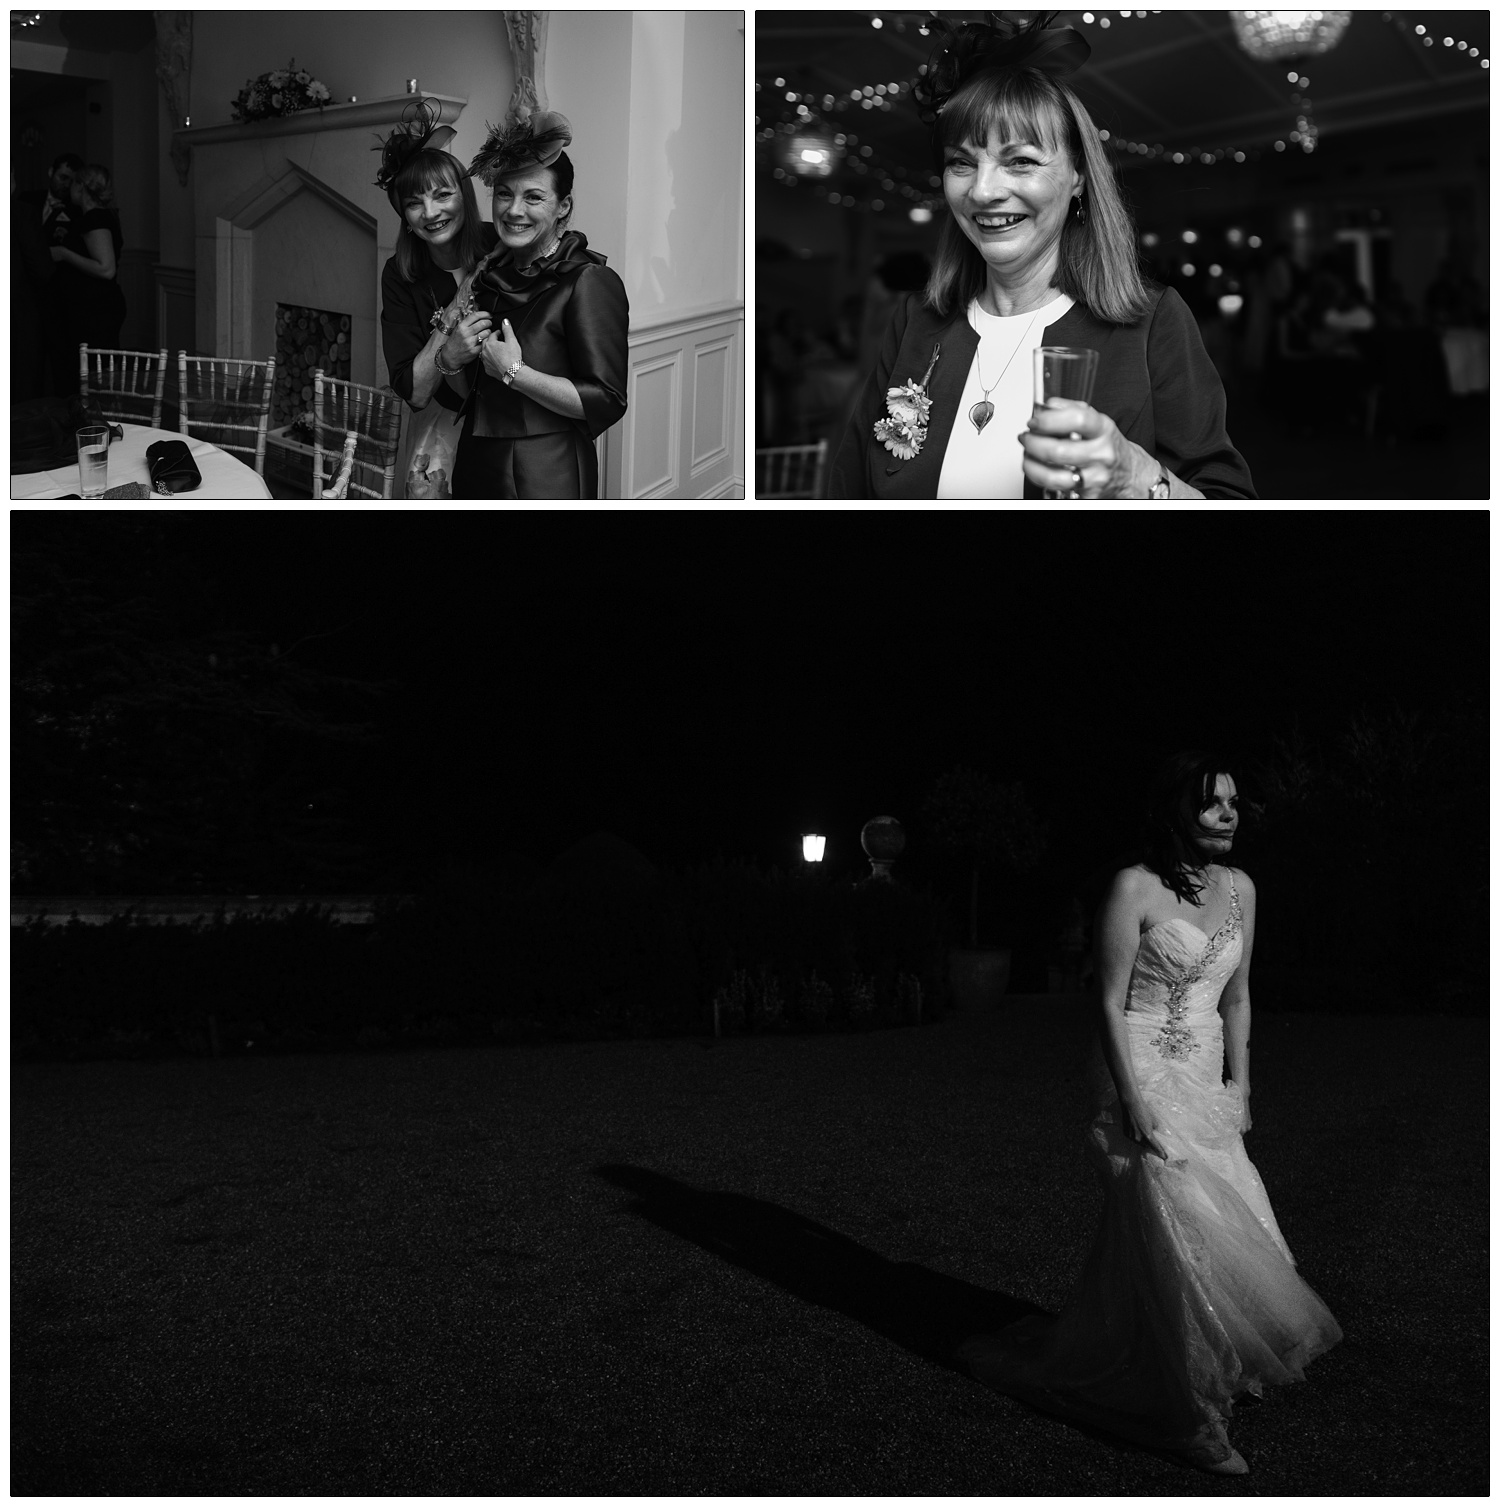 Picture of a bride outside at night in the wind. A candid moment.